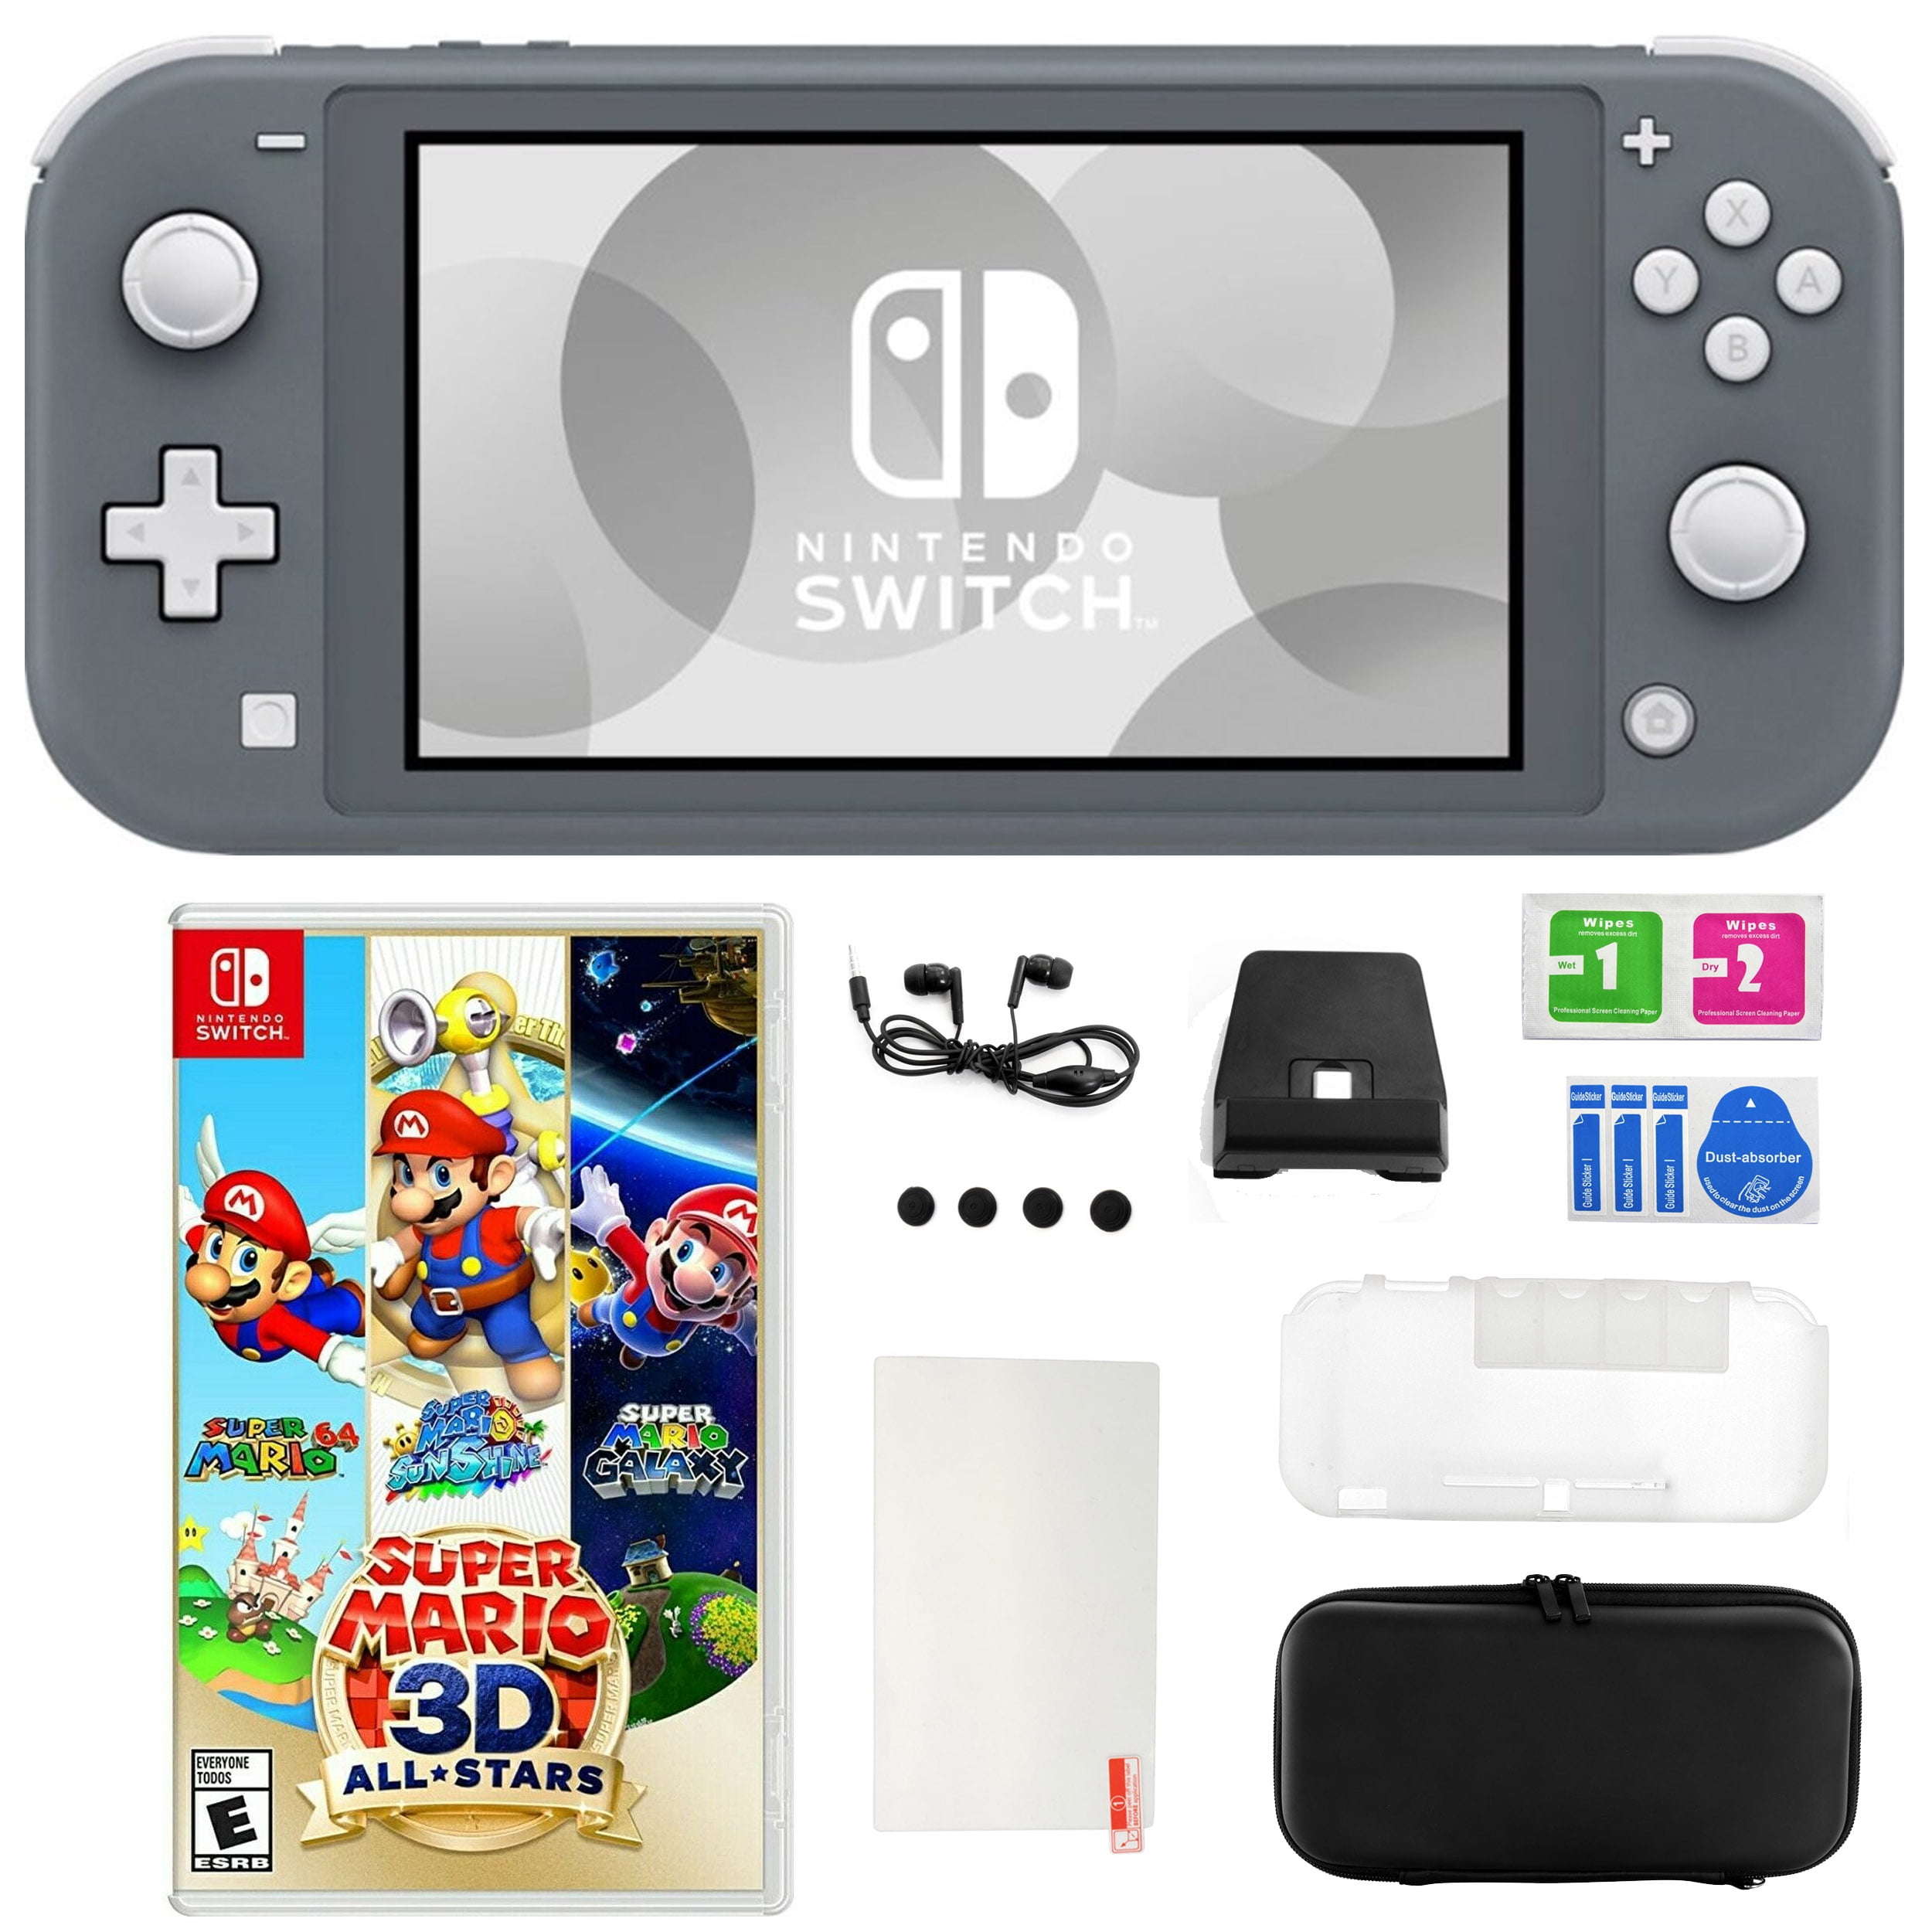 Nintendo Switch Lite in Gray with Super Mario 3D All Star Game and